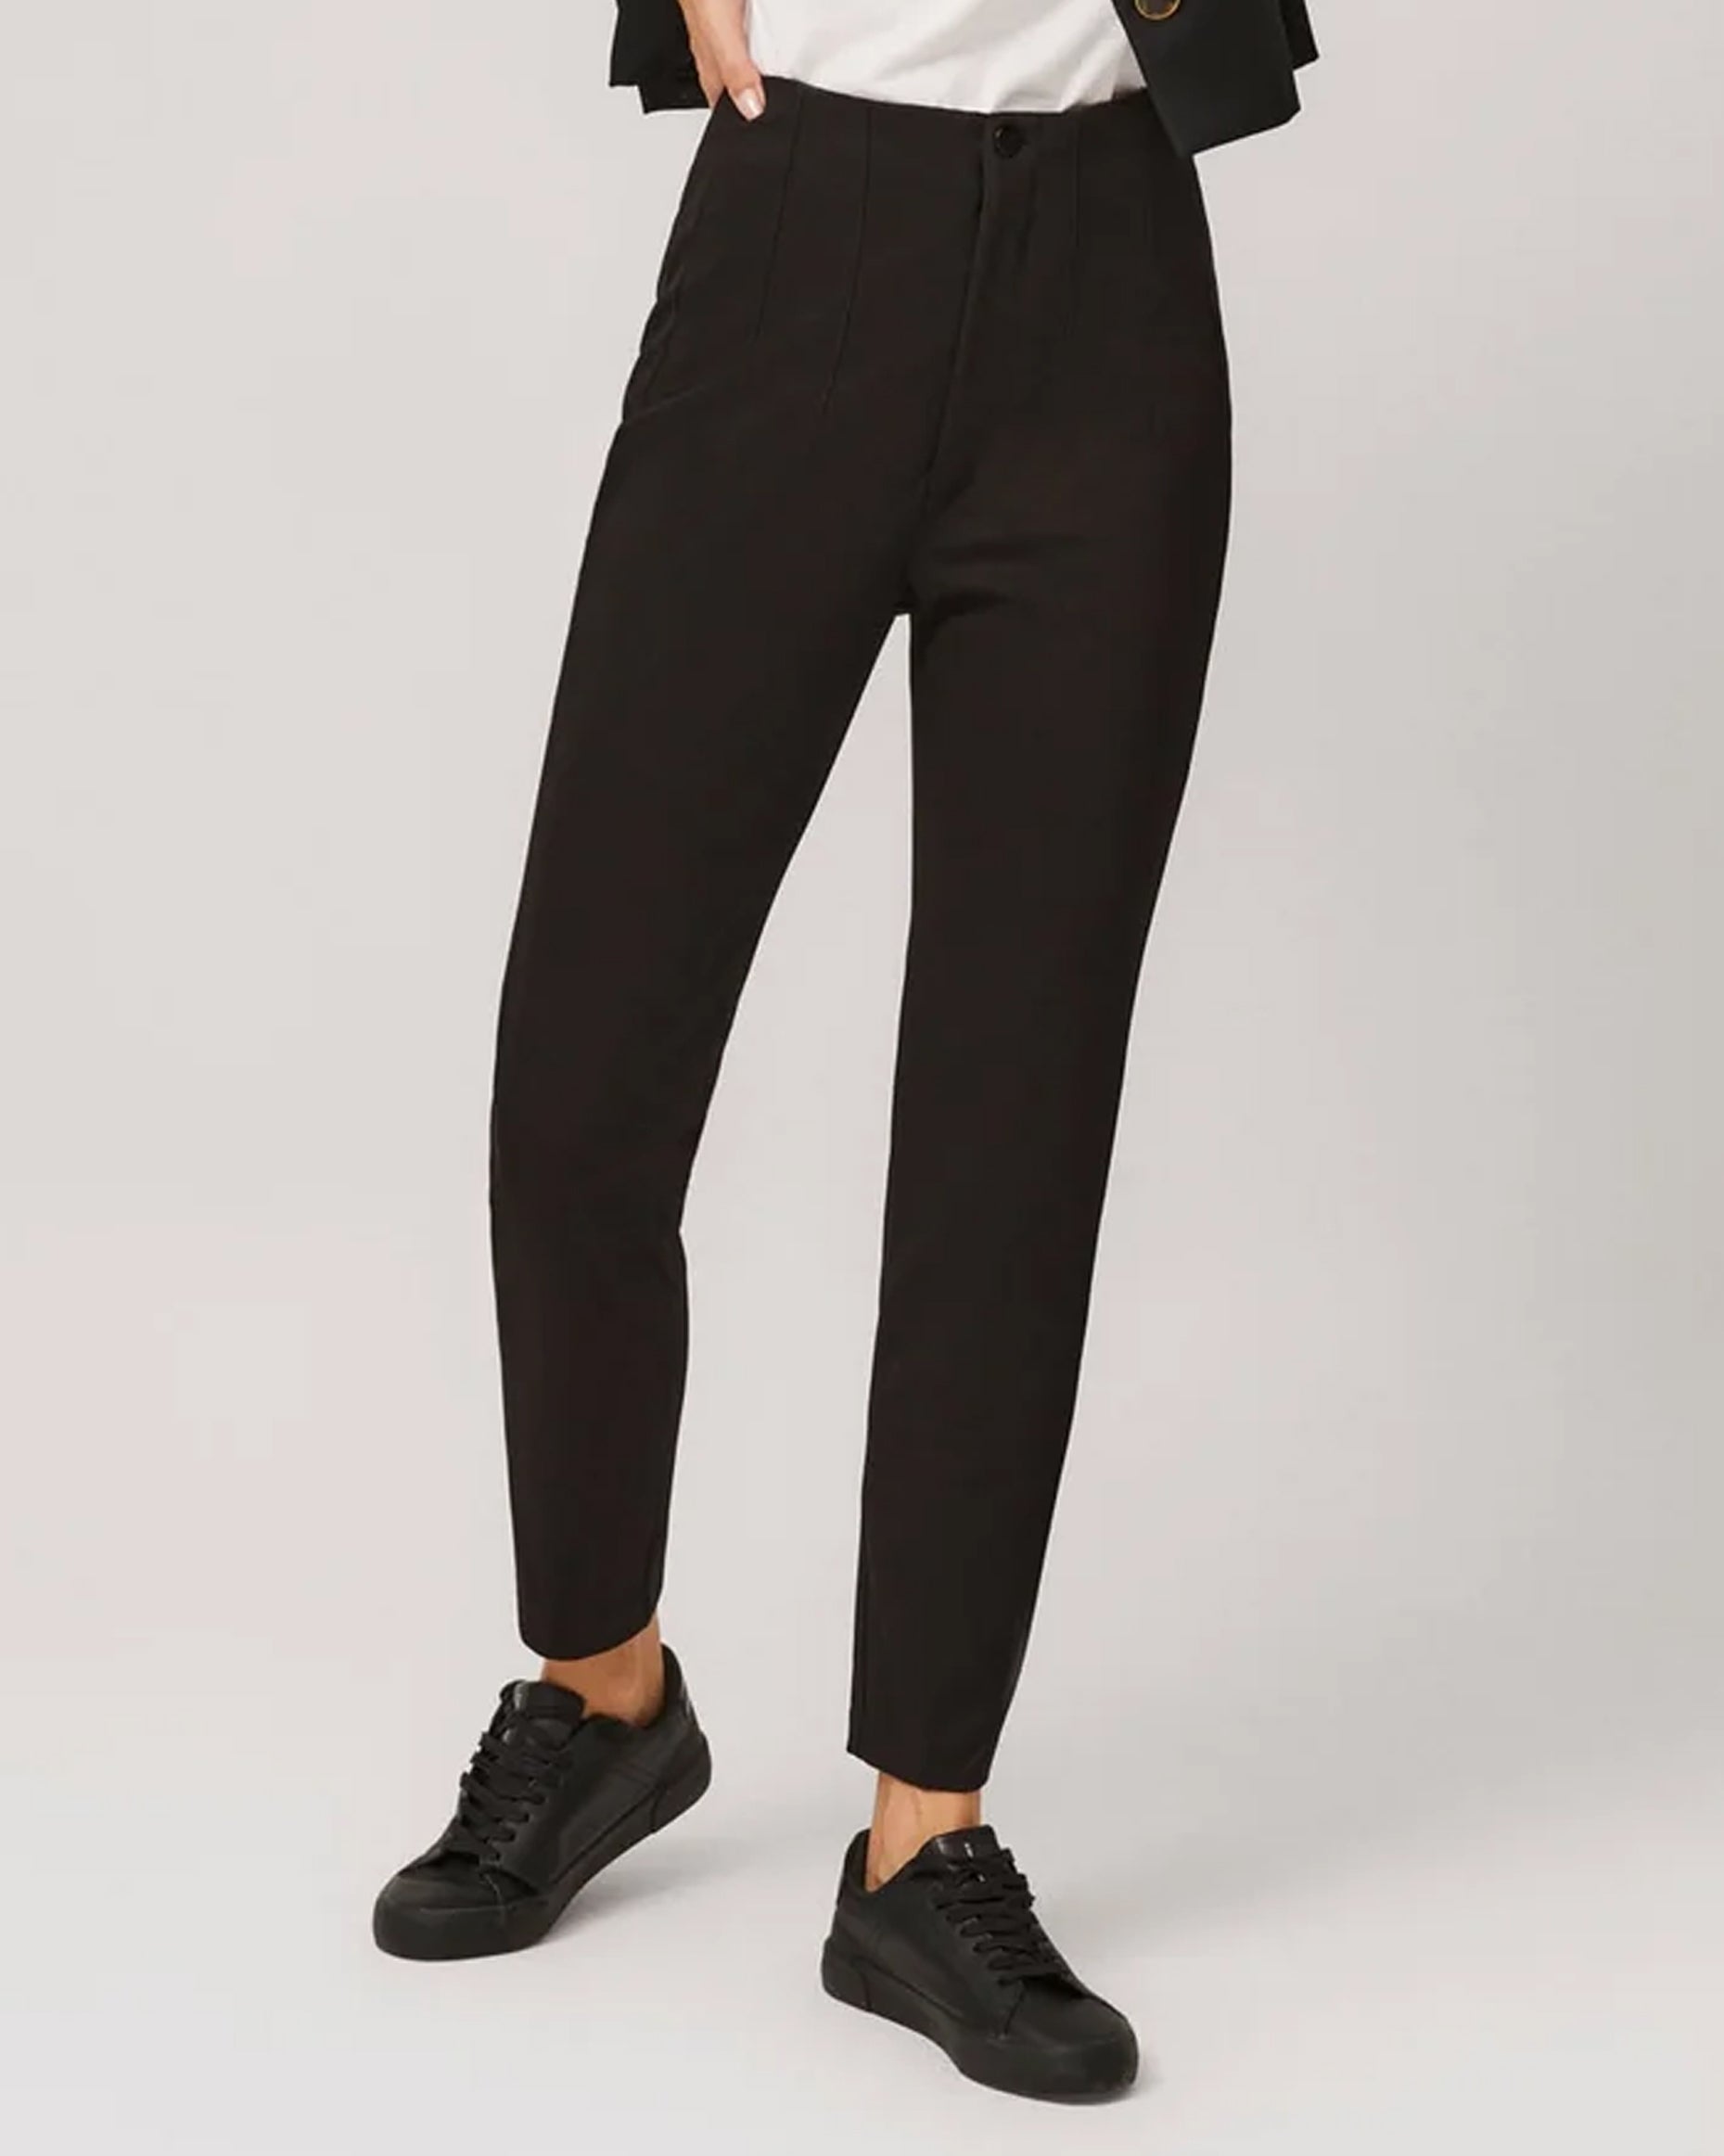 Ysabel Mora 70403 High Waist Trousers - Black ankle grazer suit style high waisted pants with pleated darts, invisible front zipper and button.